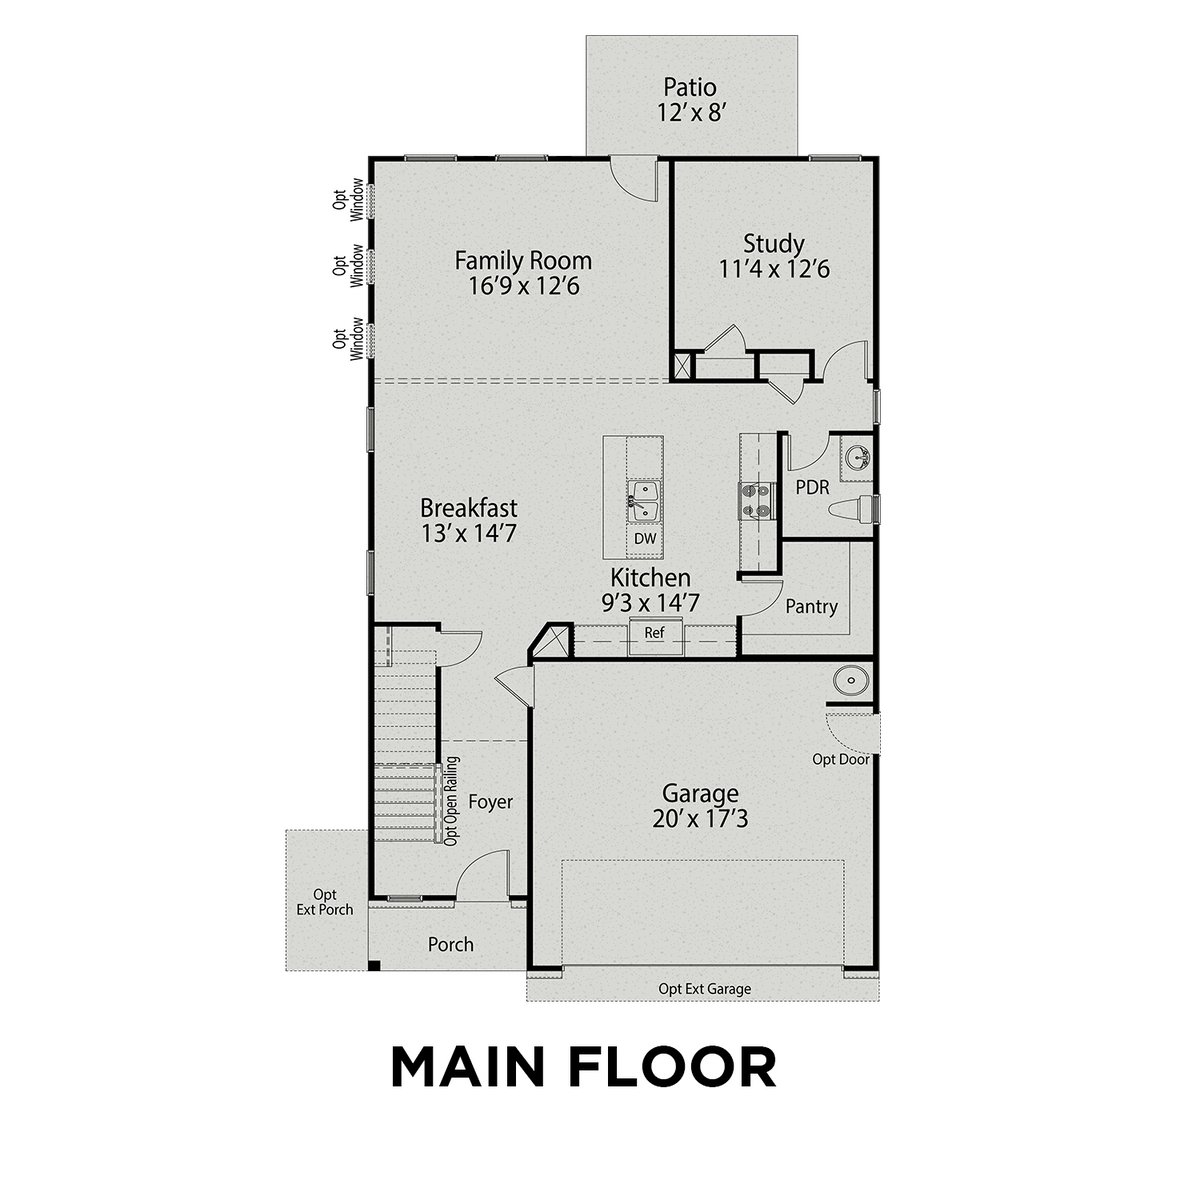 1 - The Adalynn A floor plan layout for 55 Grassy Ridge Court in Davidson Homes' Beverly Place community.